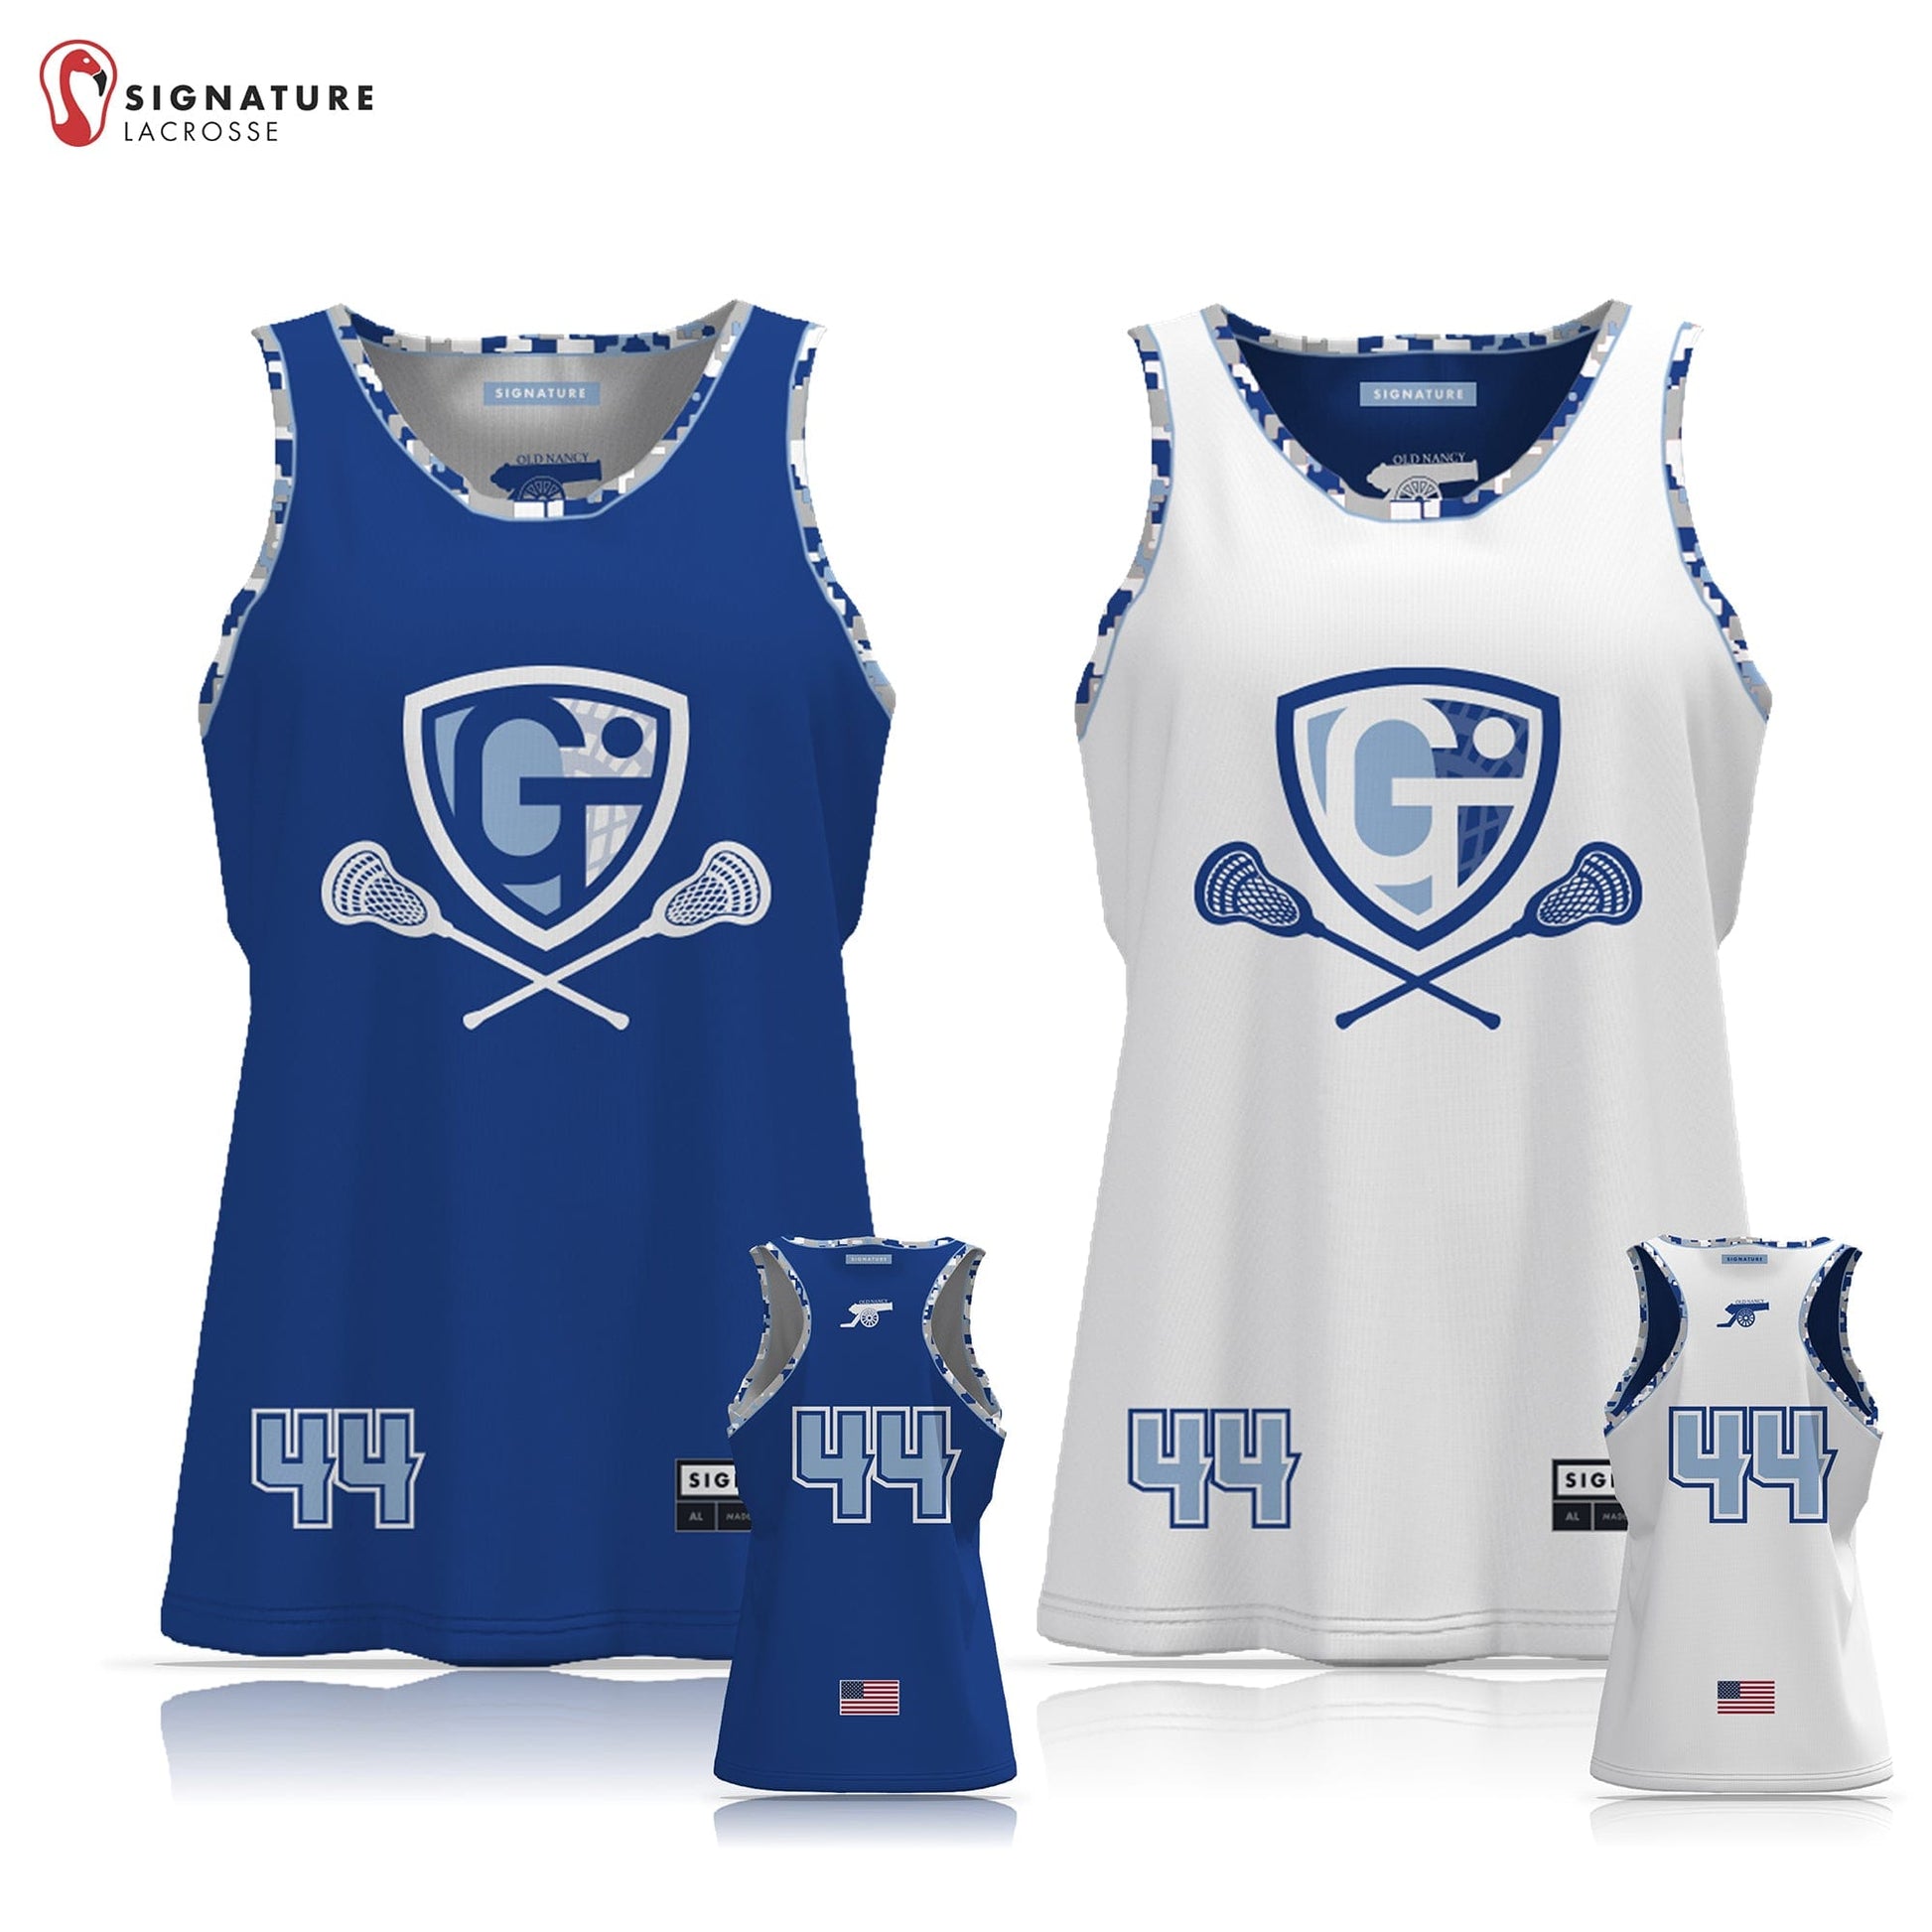 Georgetown-Triton Youth Lacrosse Women's Player Reversible Game Pinnie: 3-4 Signature Lacrosse